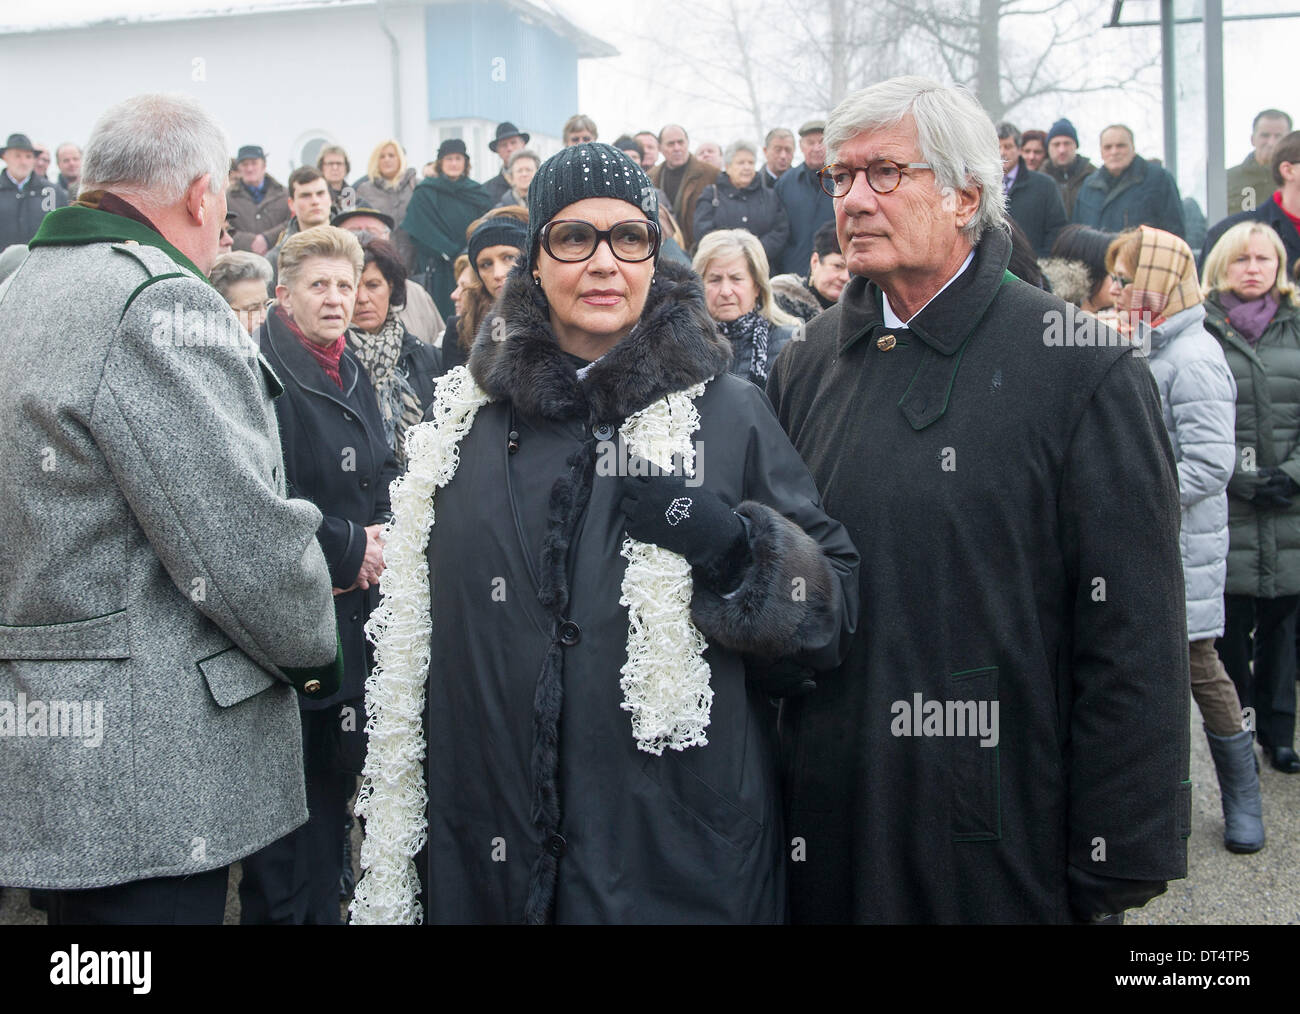 Preitenegg, Austria. 08th Feb, 2014. Actor Christian Wolff and his wife Marina attends the funeral service for the Swiss-Austrian actor Maximilian Schell in his hometown Preitenegg, Austria, 08 February 2014. Maximilian Schell died aged 83 after a surgery on 01 February 2014. Photo: Marc Mueller/dpa/Alamy Live News Stock Photo